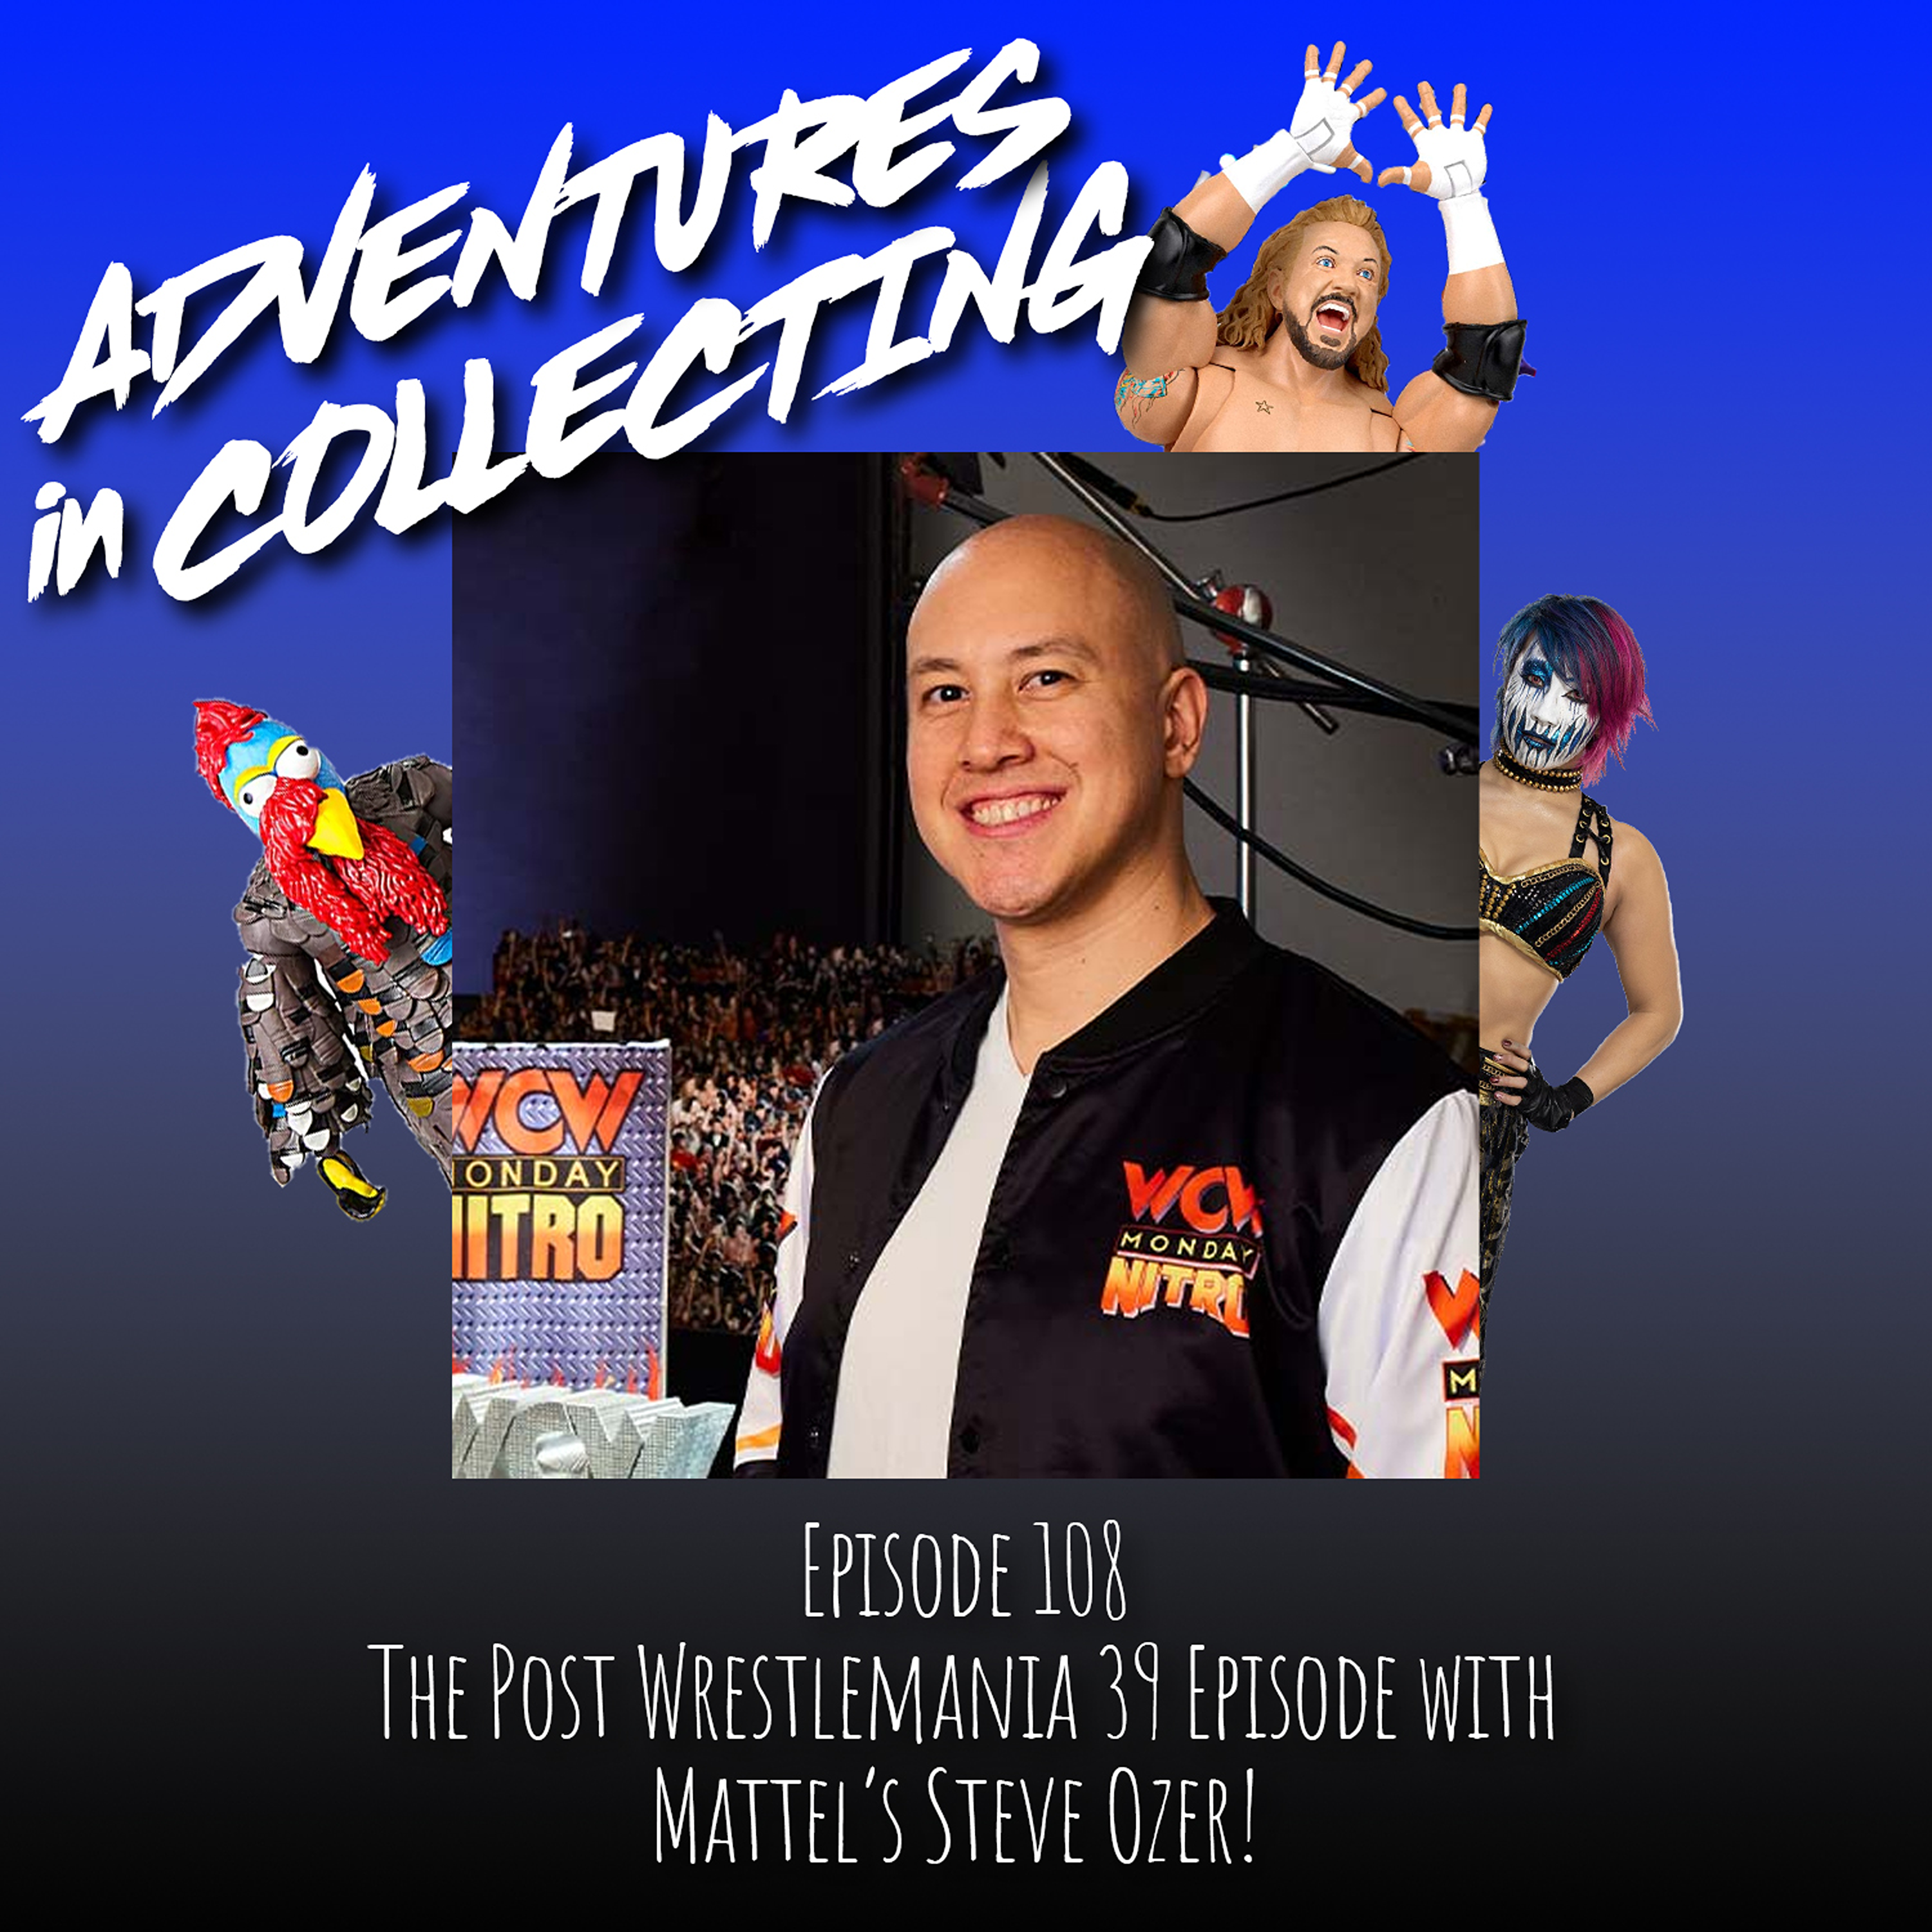 The Post Wrestlemania 39 Episode with Mattel's Steve Ozer